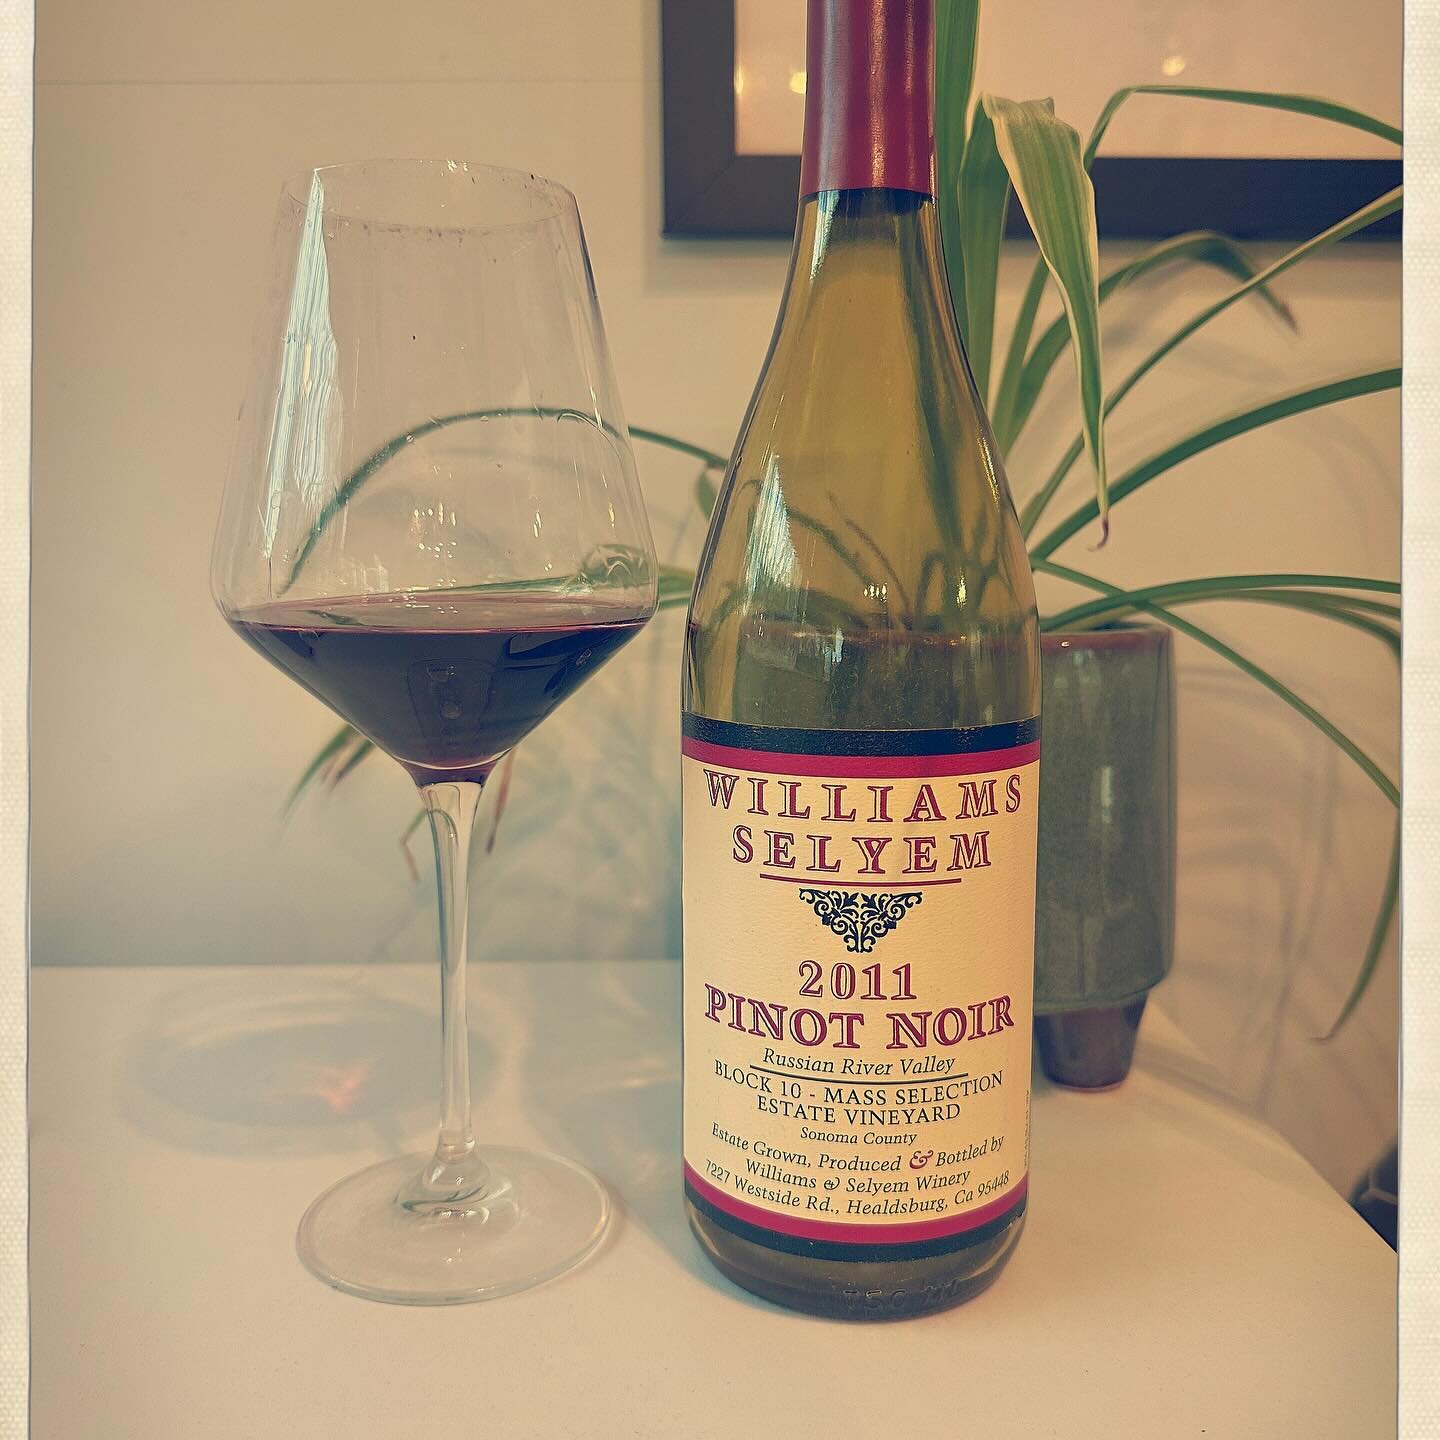 Is there anything better than decade-plus aged RRV Pinot Noir from Williams Selyem @williamsselyemwinery (aside from ABC)!? 

First time trying the 2011 &ldquo;Block 10 - mass selection&rdquo;, which was their 4th year of bottling this, an estate ble